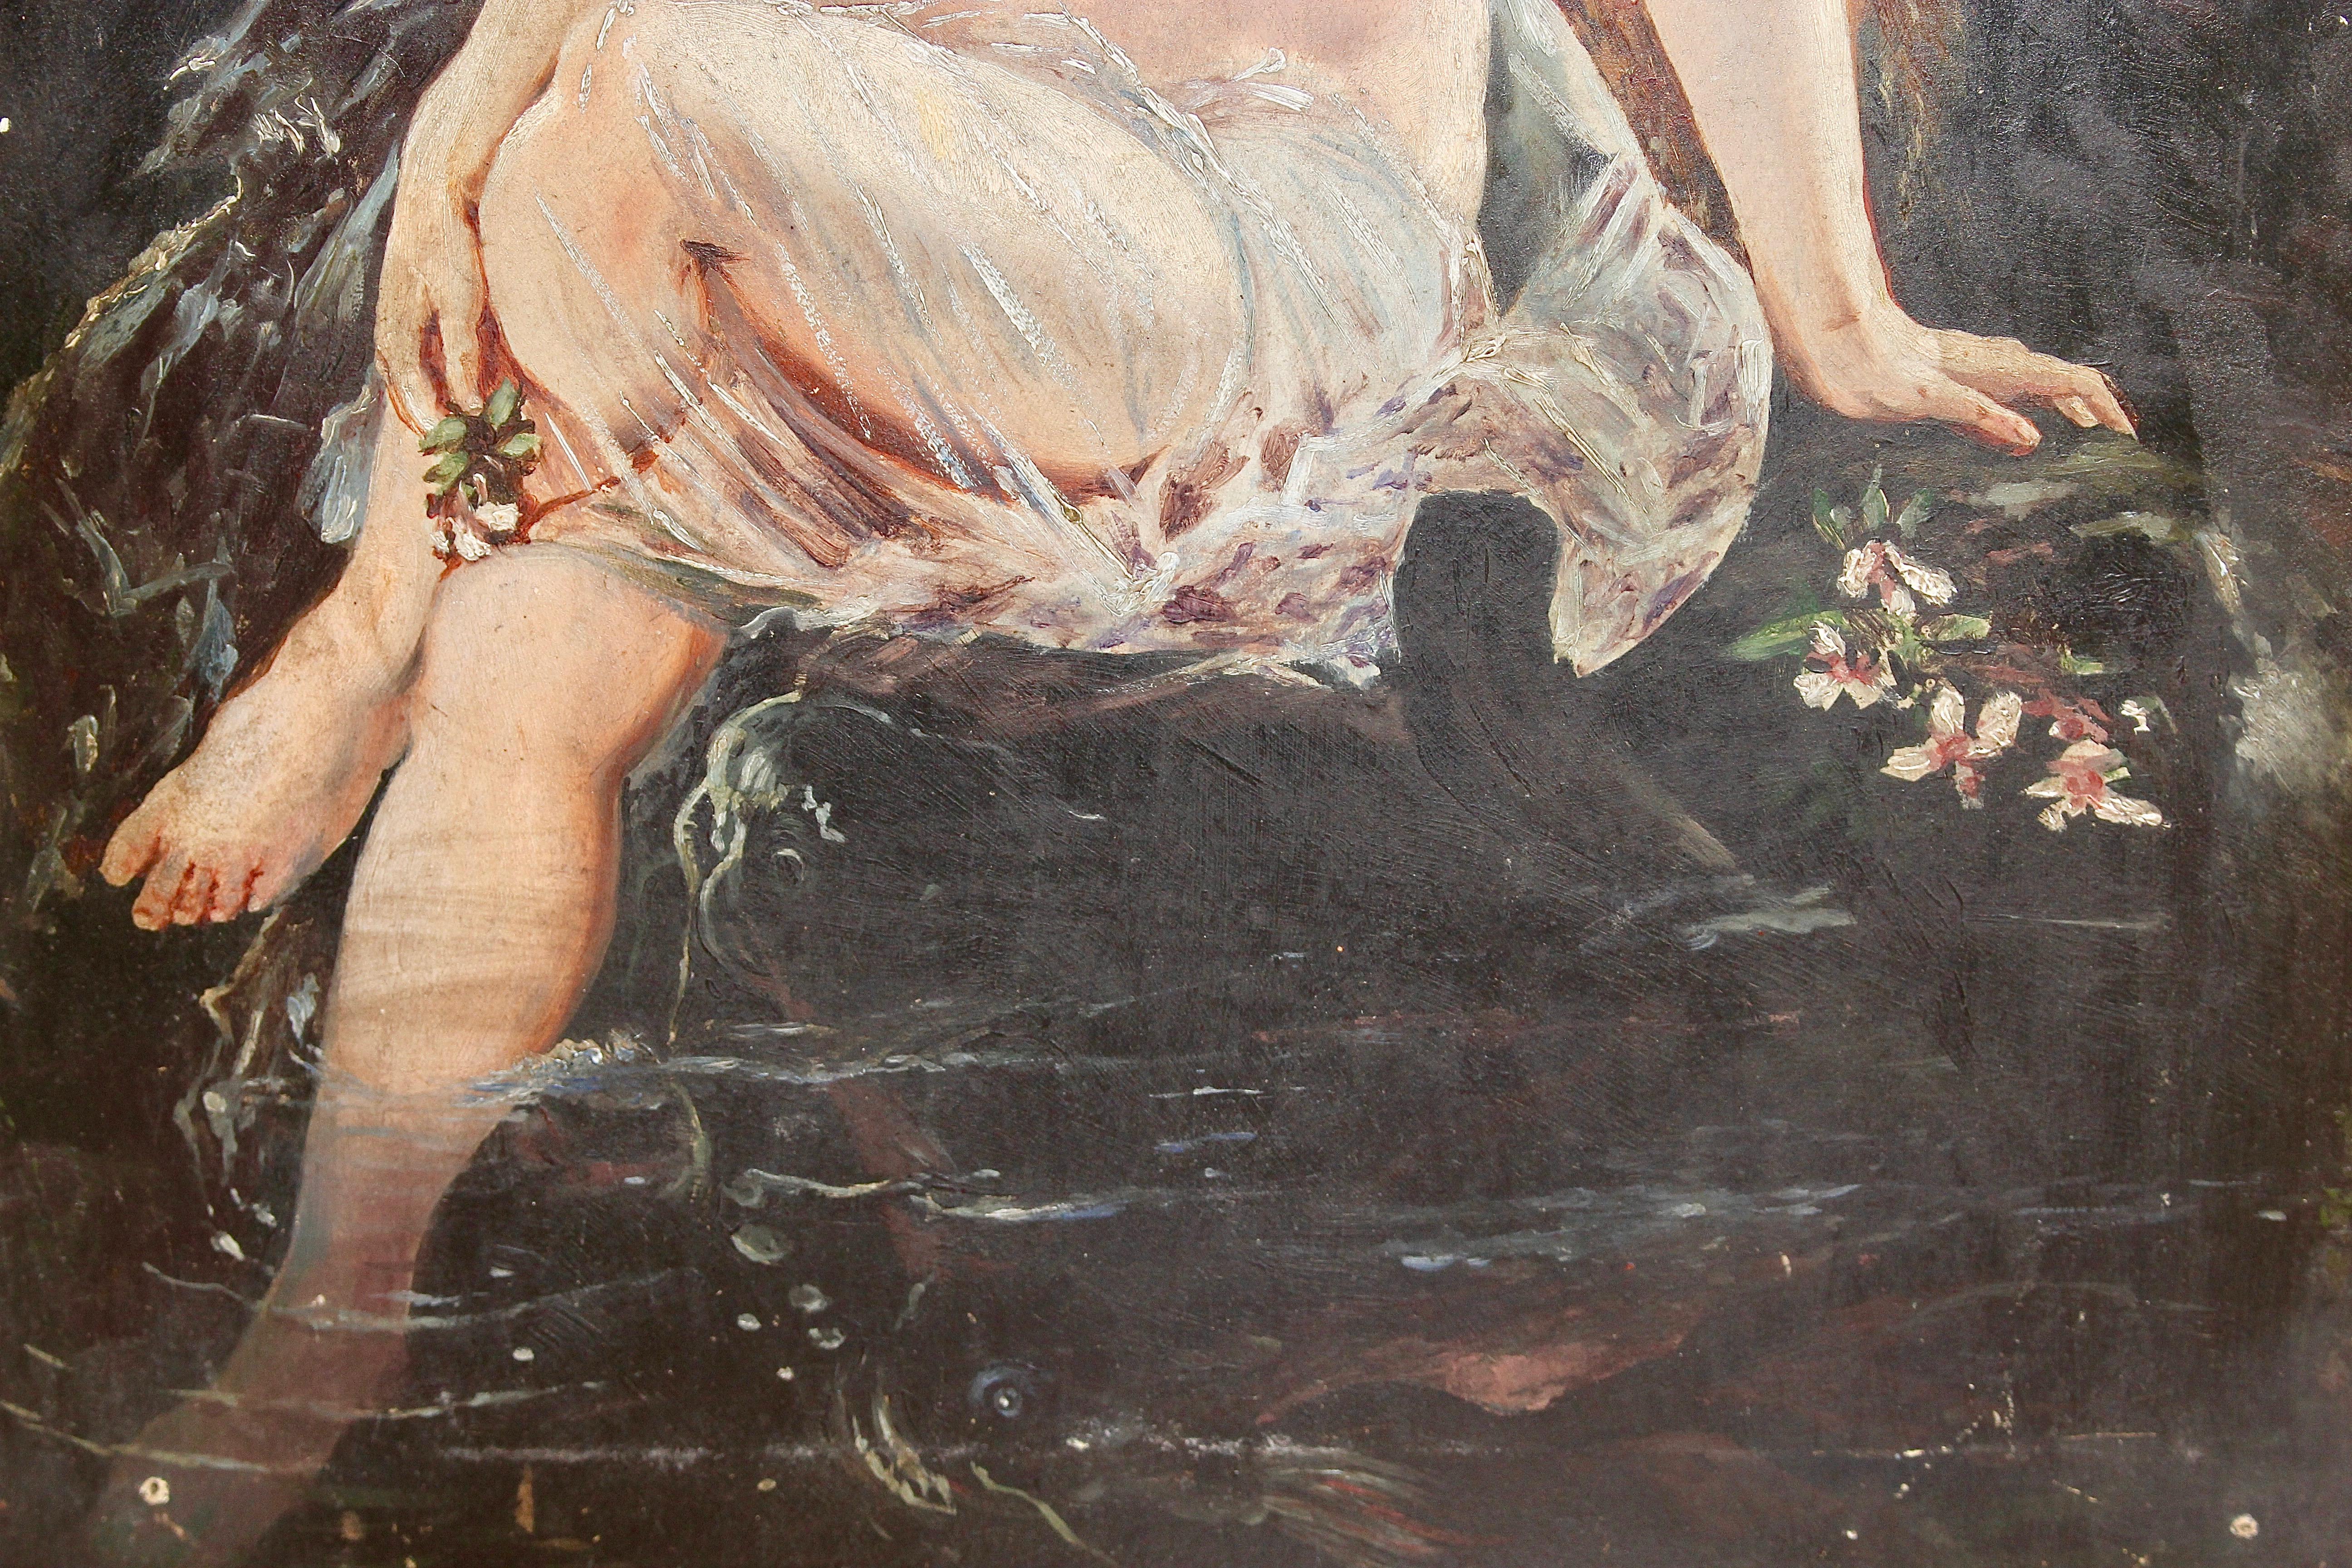 Antique Nude Oil Painting, 19th Century. Bath Mermaid on the Lake.  - Black Nude Painting by Unknown